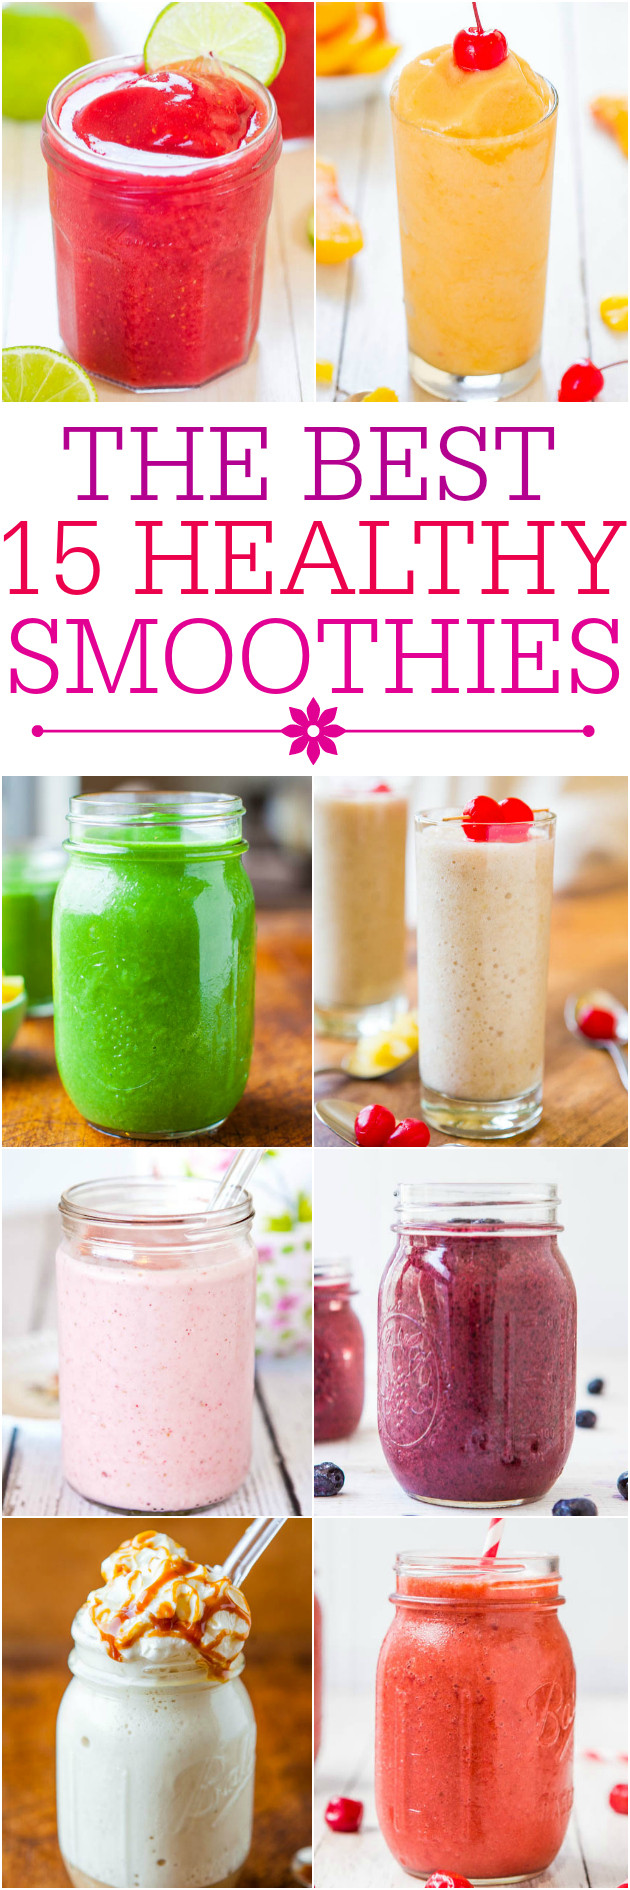 Healthy Energy Smoothie Recipes
 Fruit and Yogurt Smoothie Averie Cooks